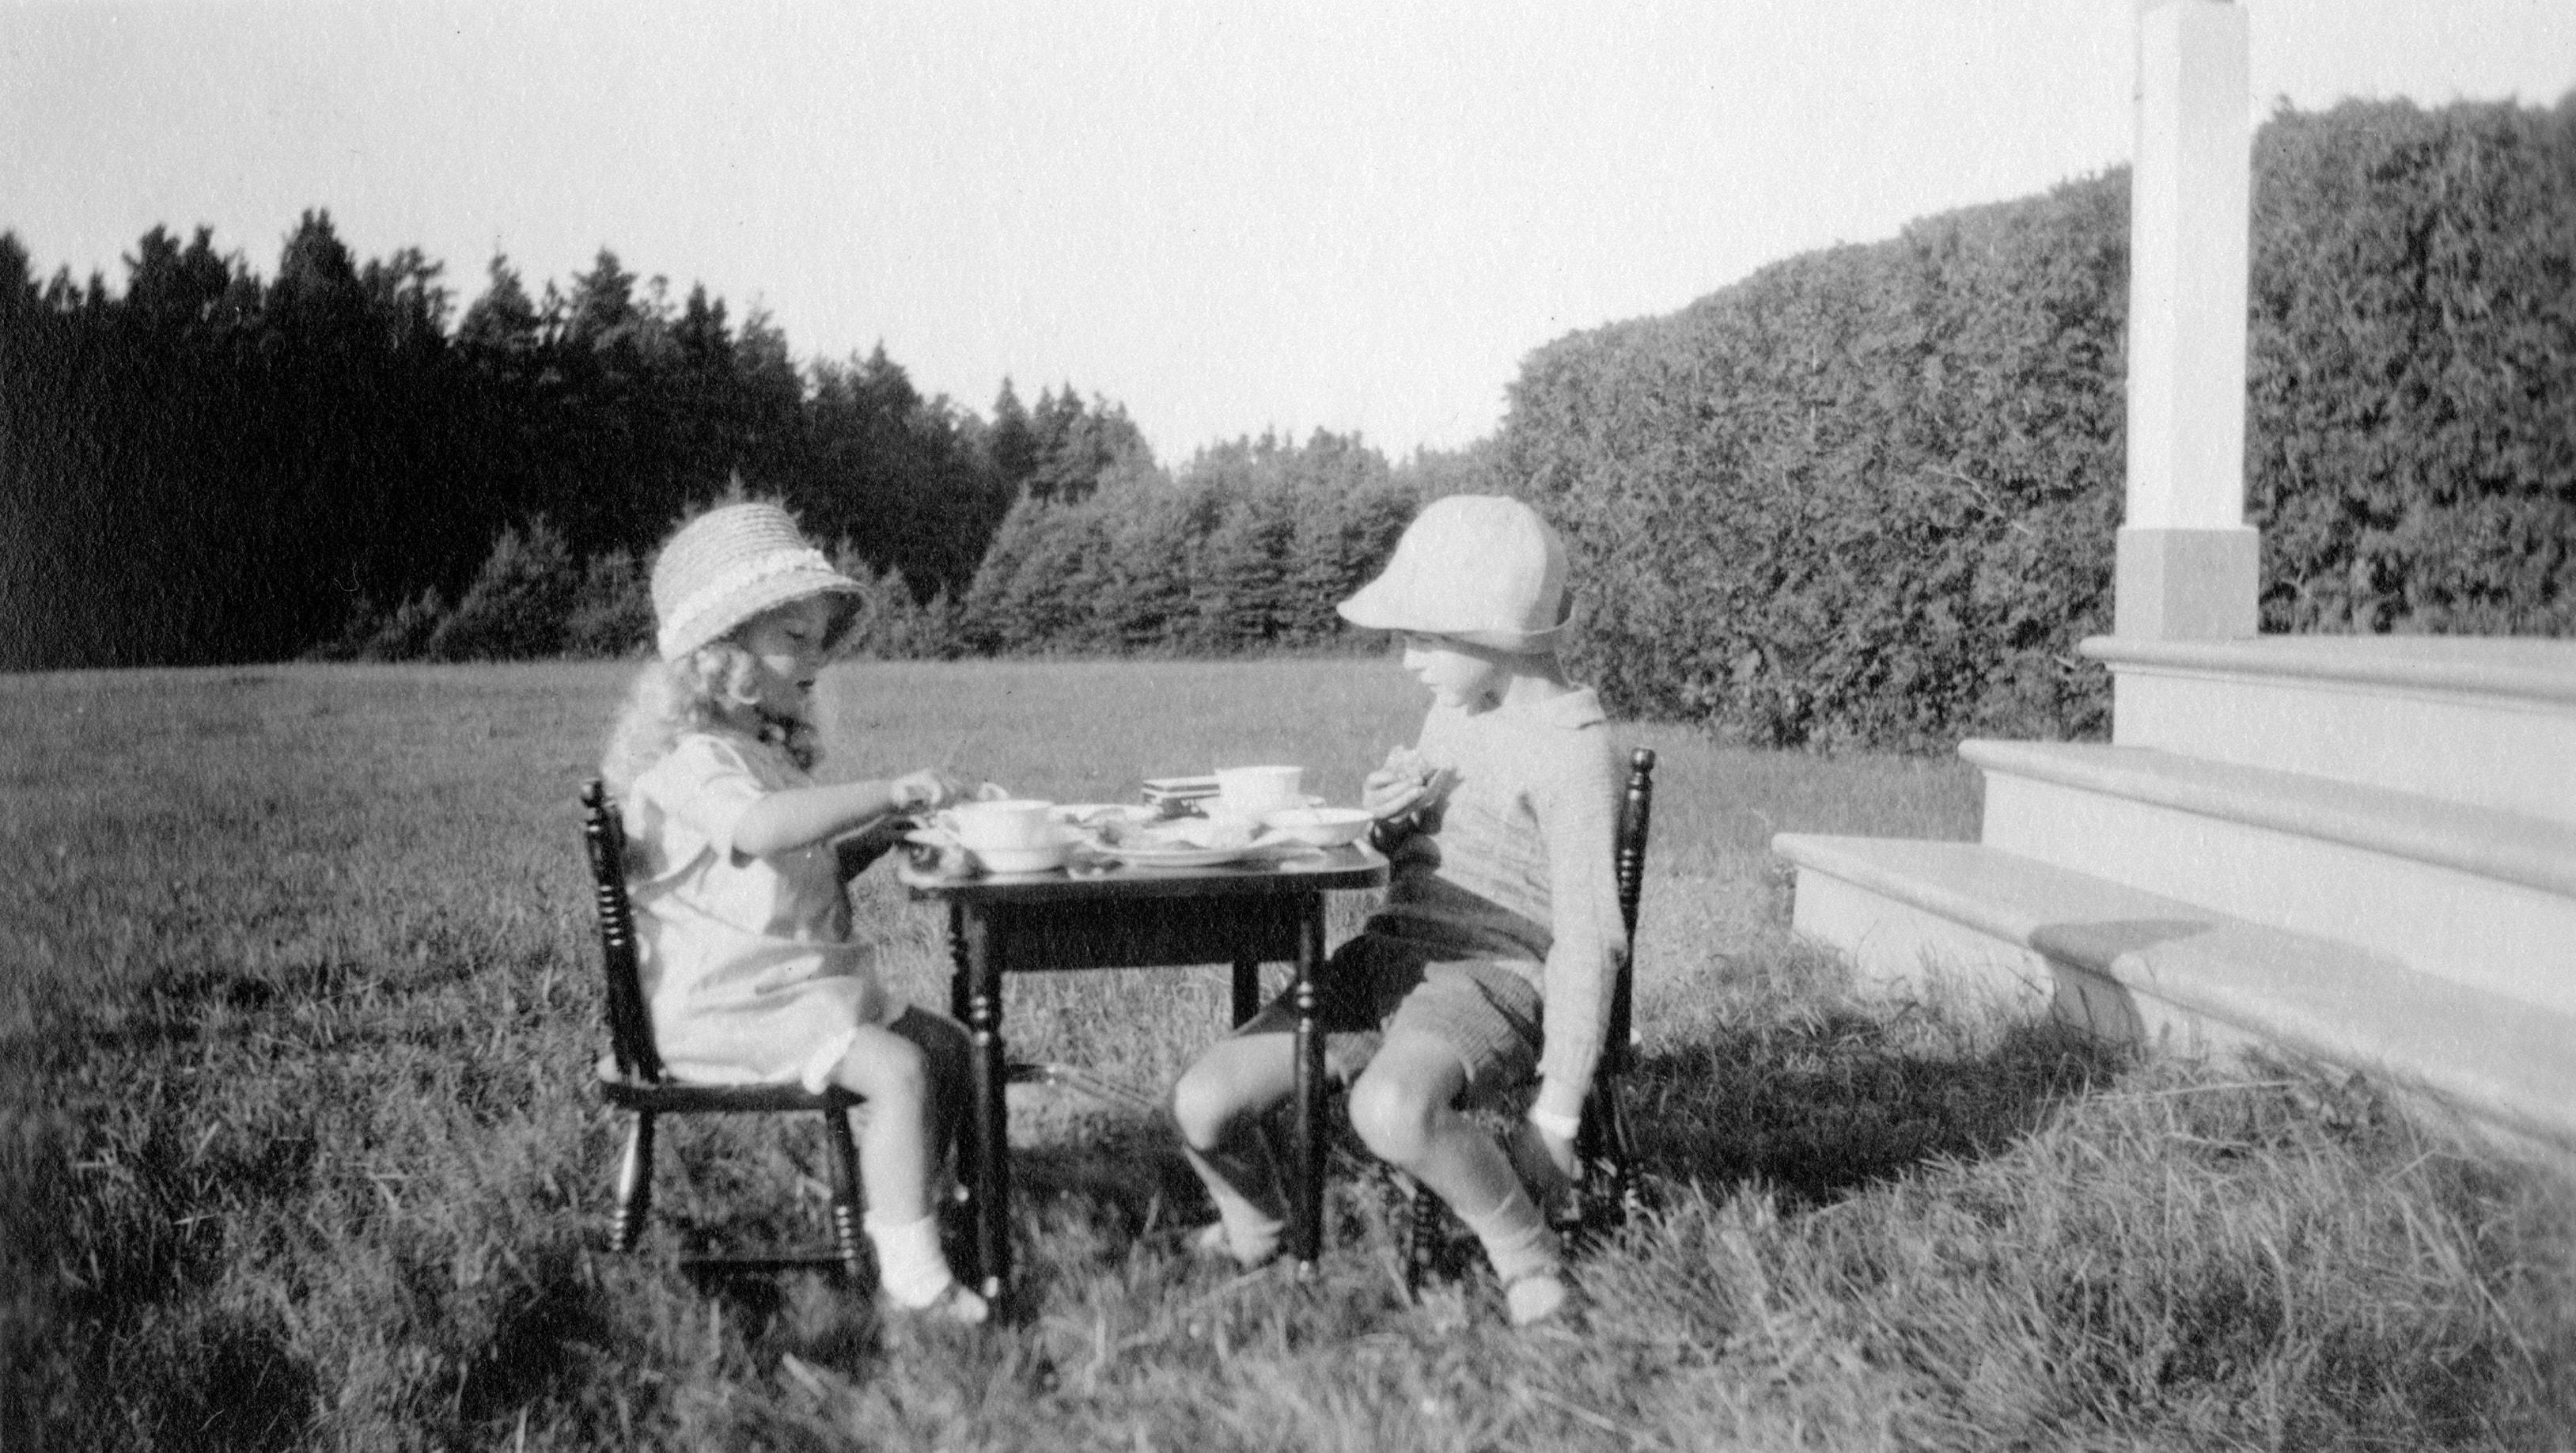 Two children are serving themselves at a little table set up on the lawn.